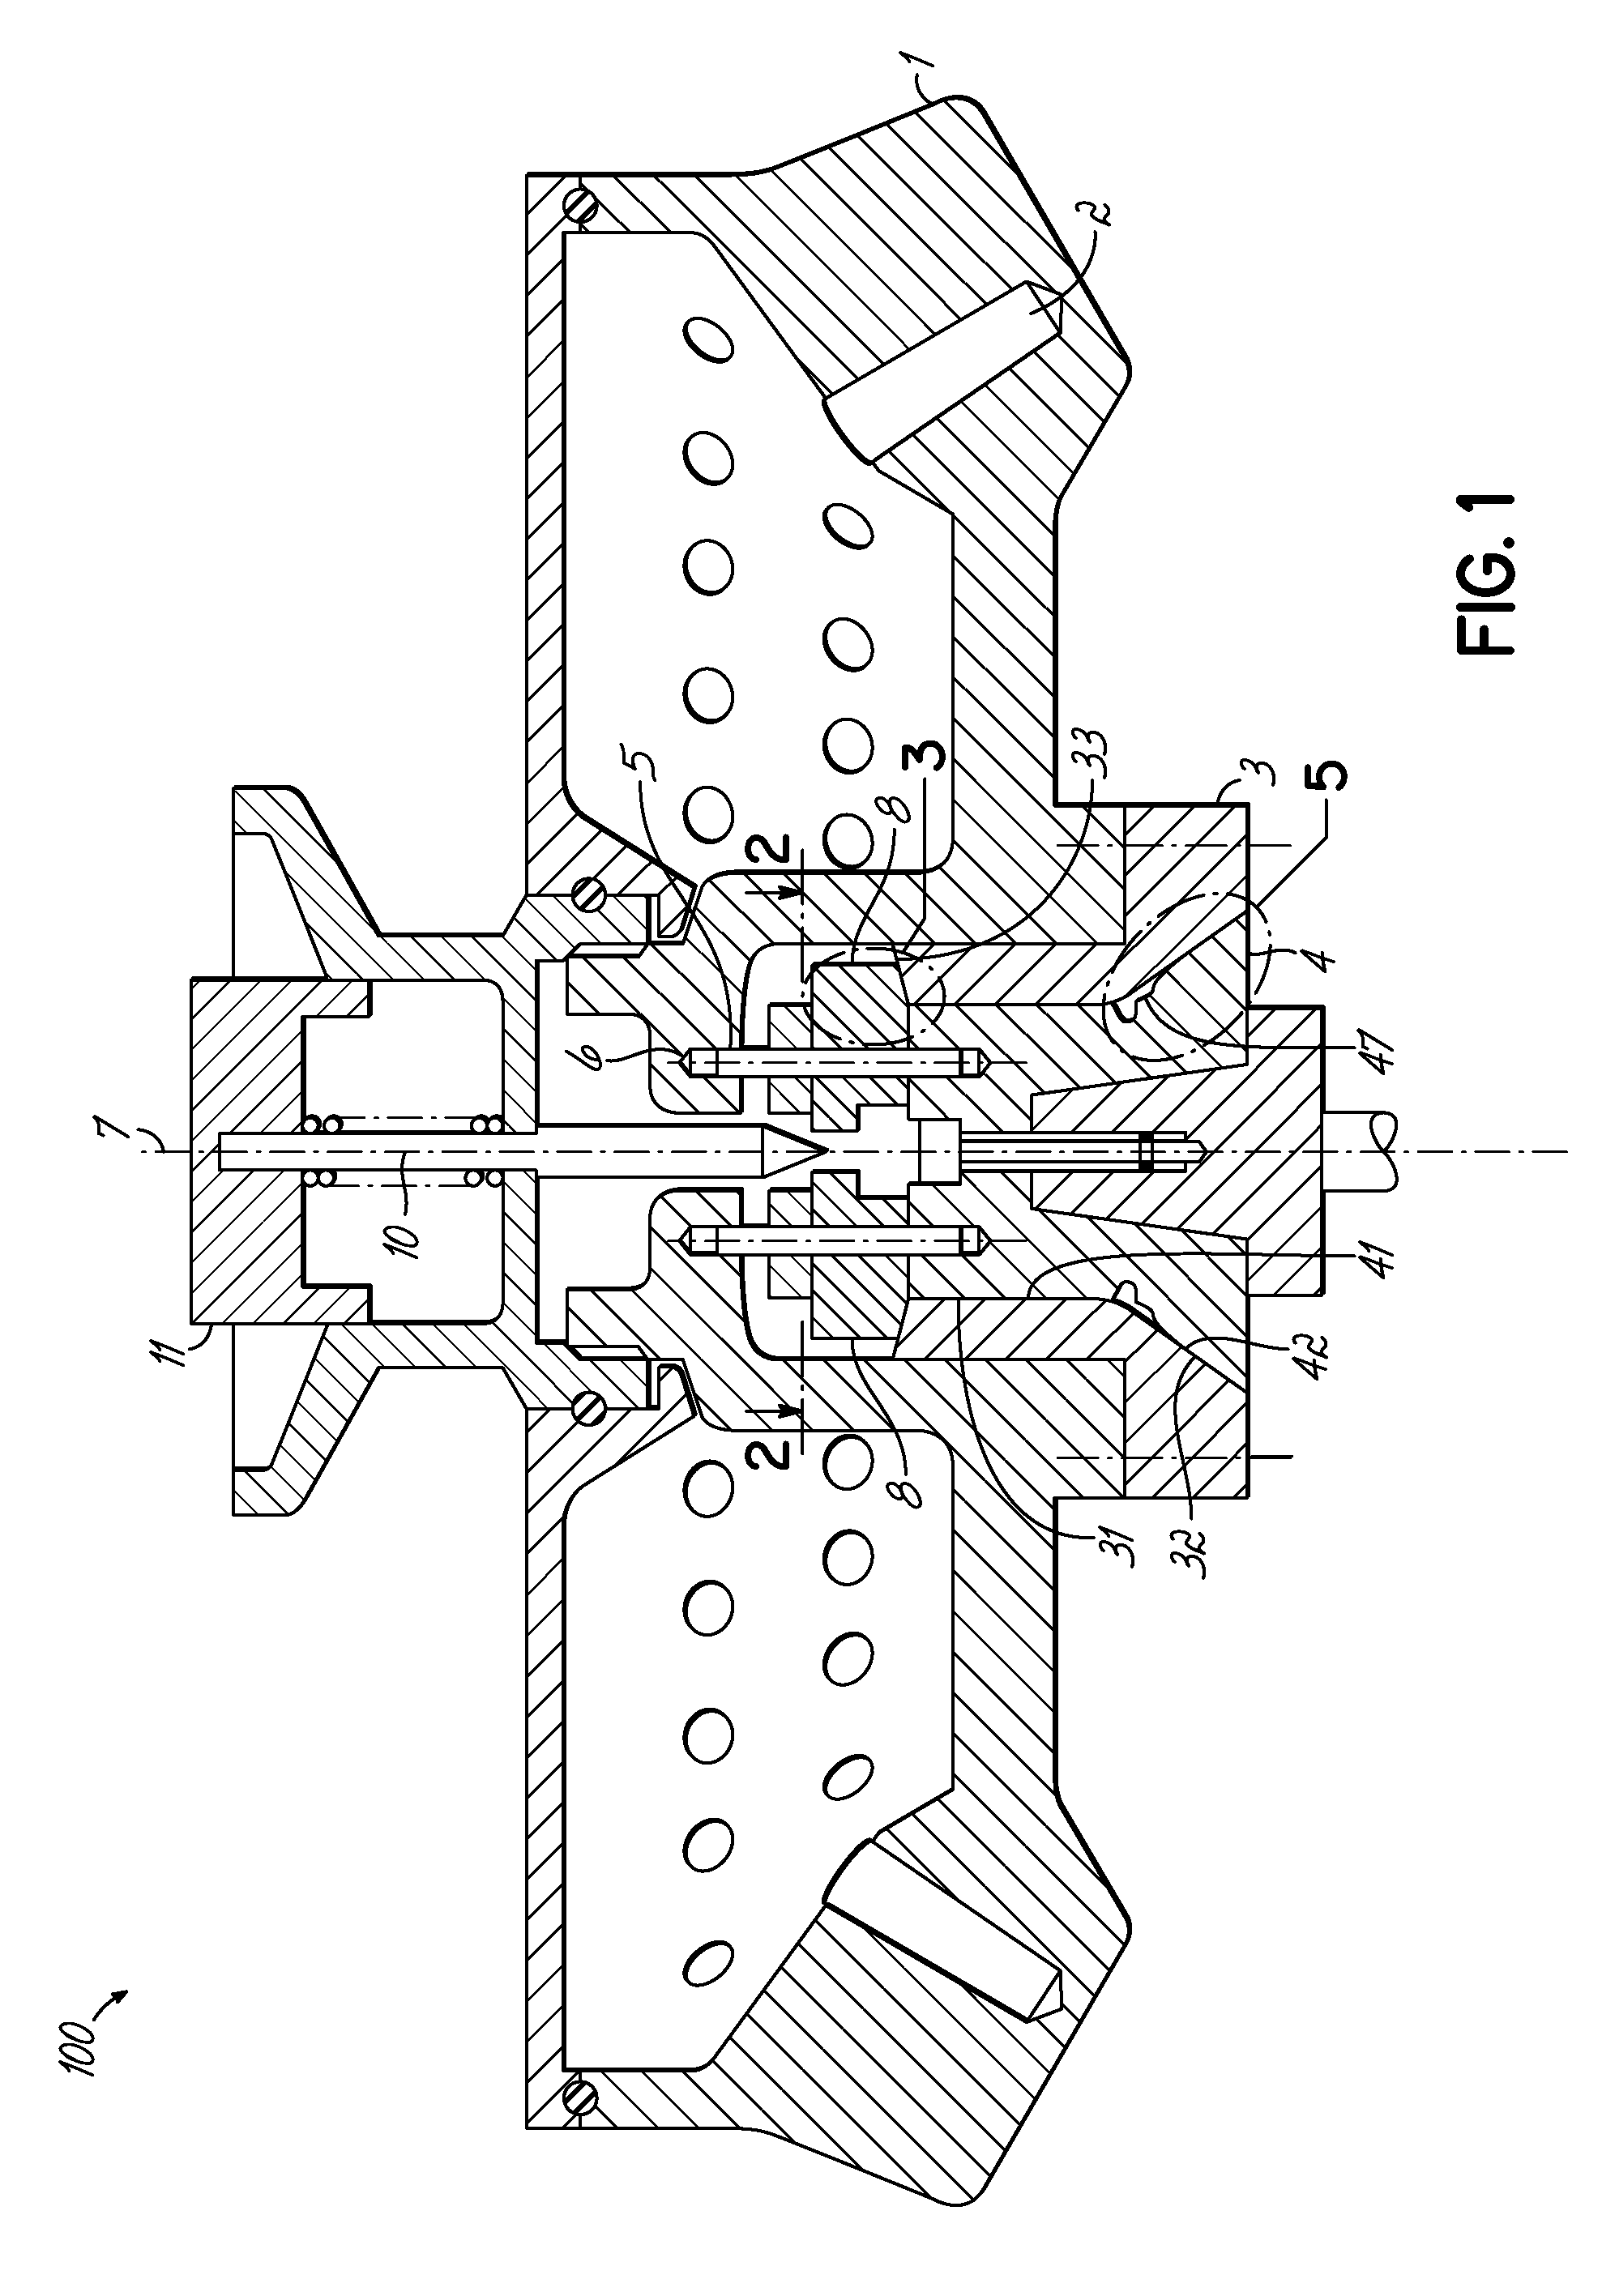 Centrifuge with a coupling element for axially locking a rotor